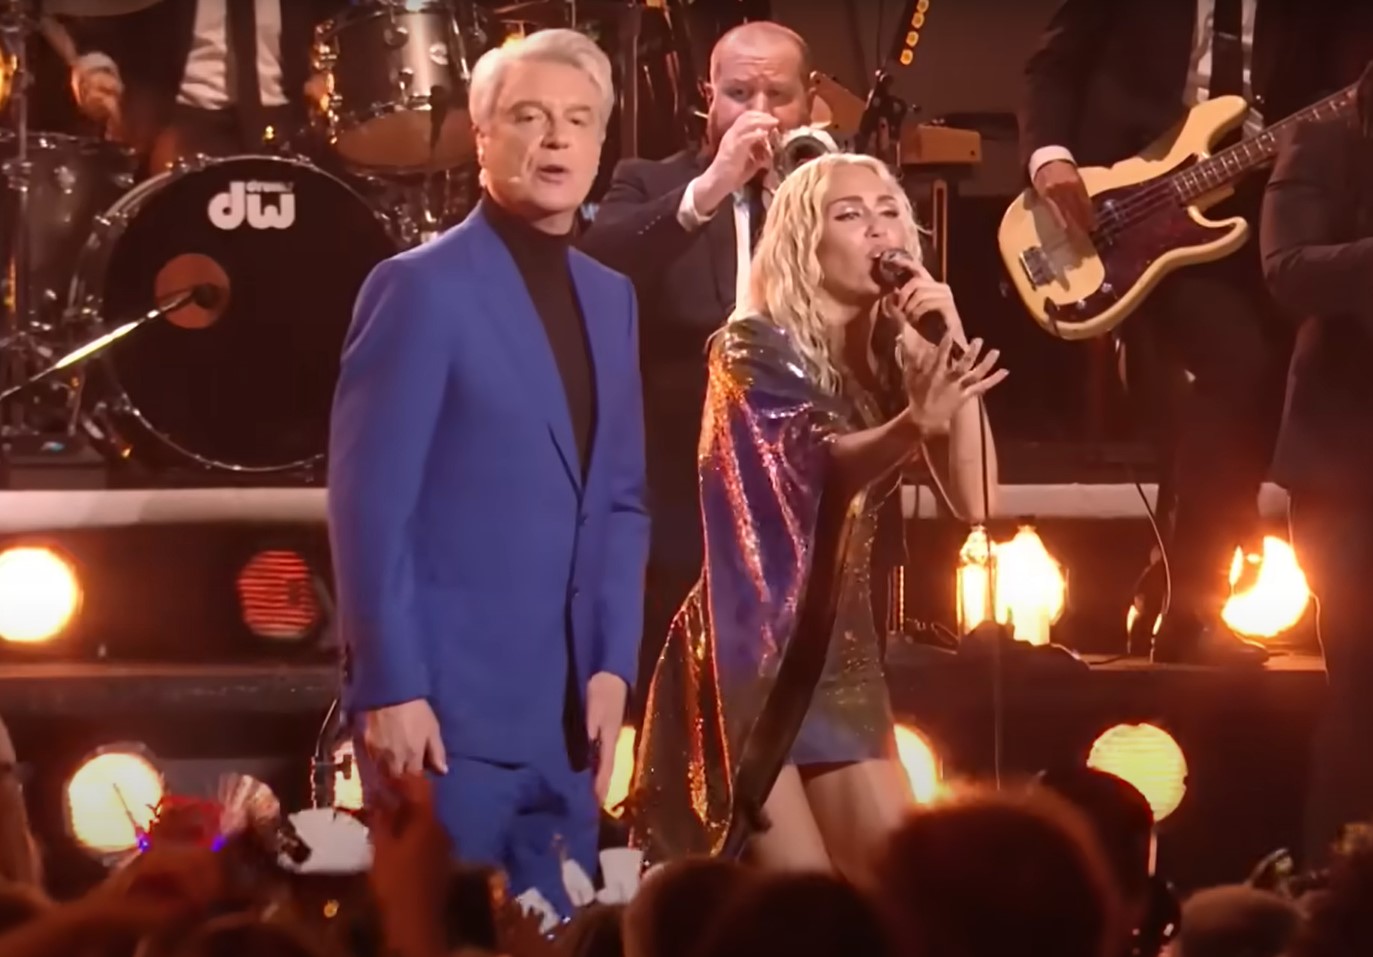 Watch The Talking Heads' David Byrne Perform David Bowie's "Let's Dance" With Miley Cyrus